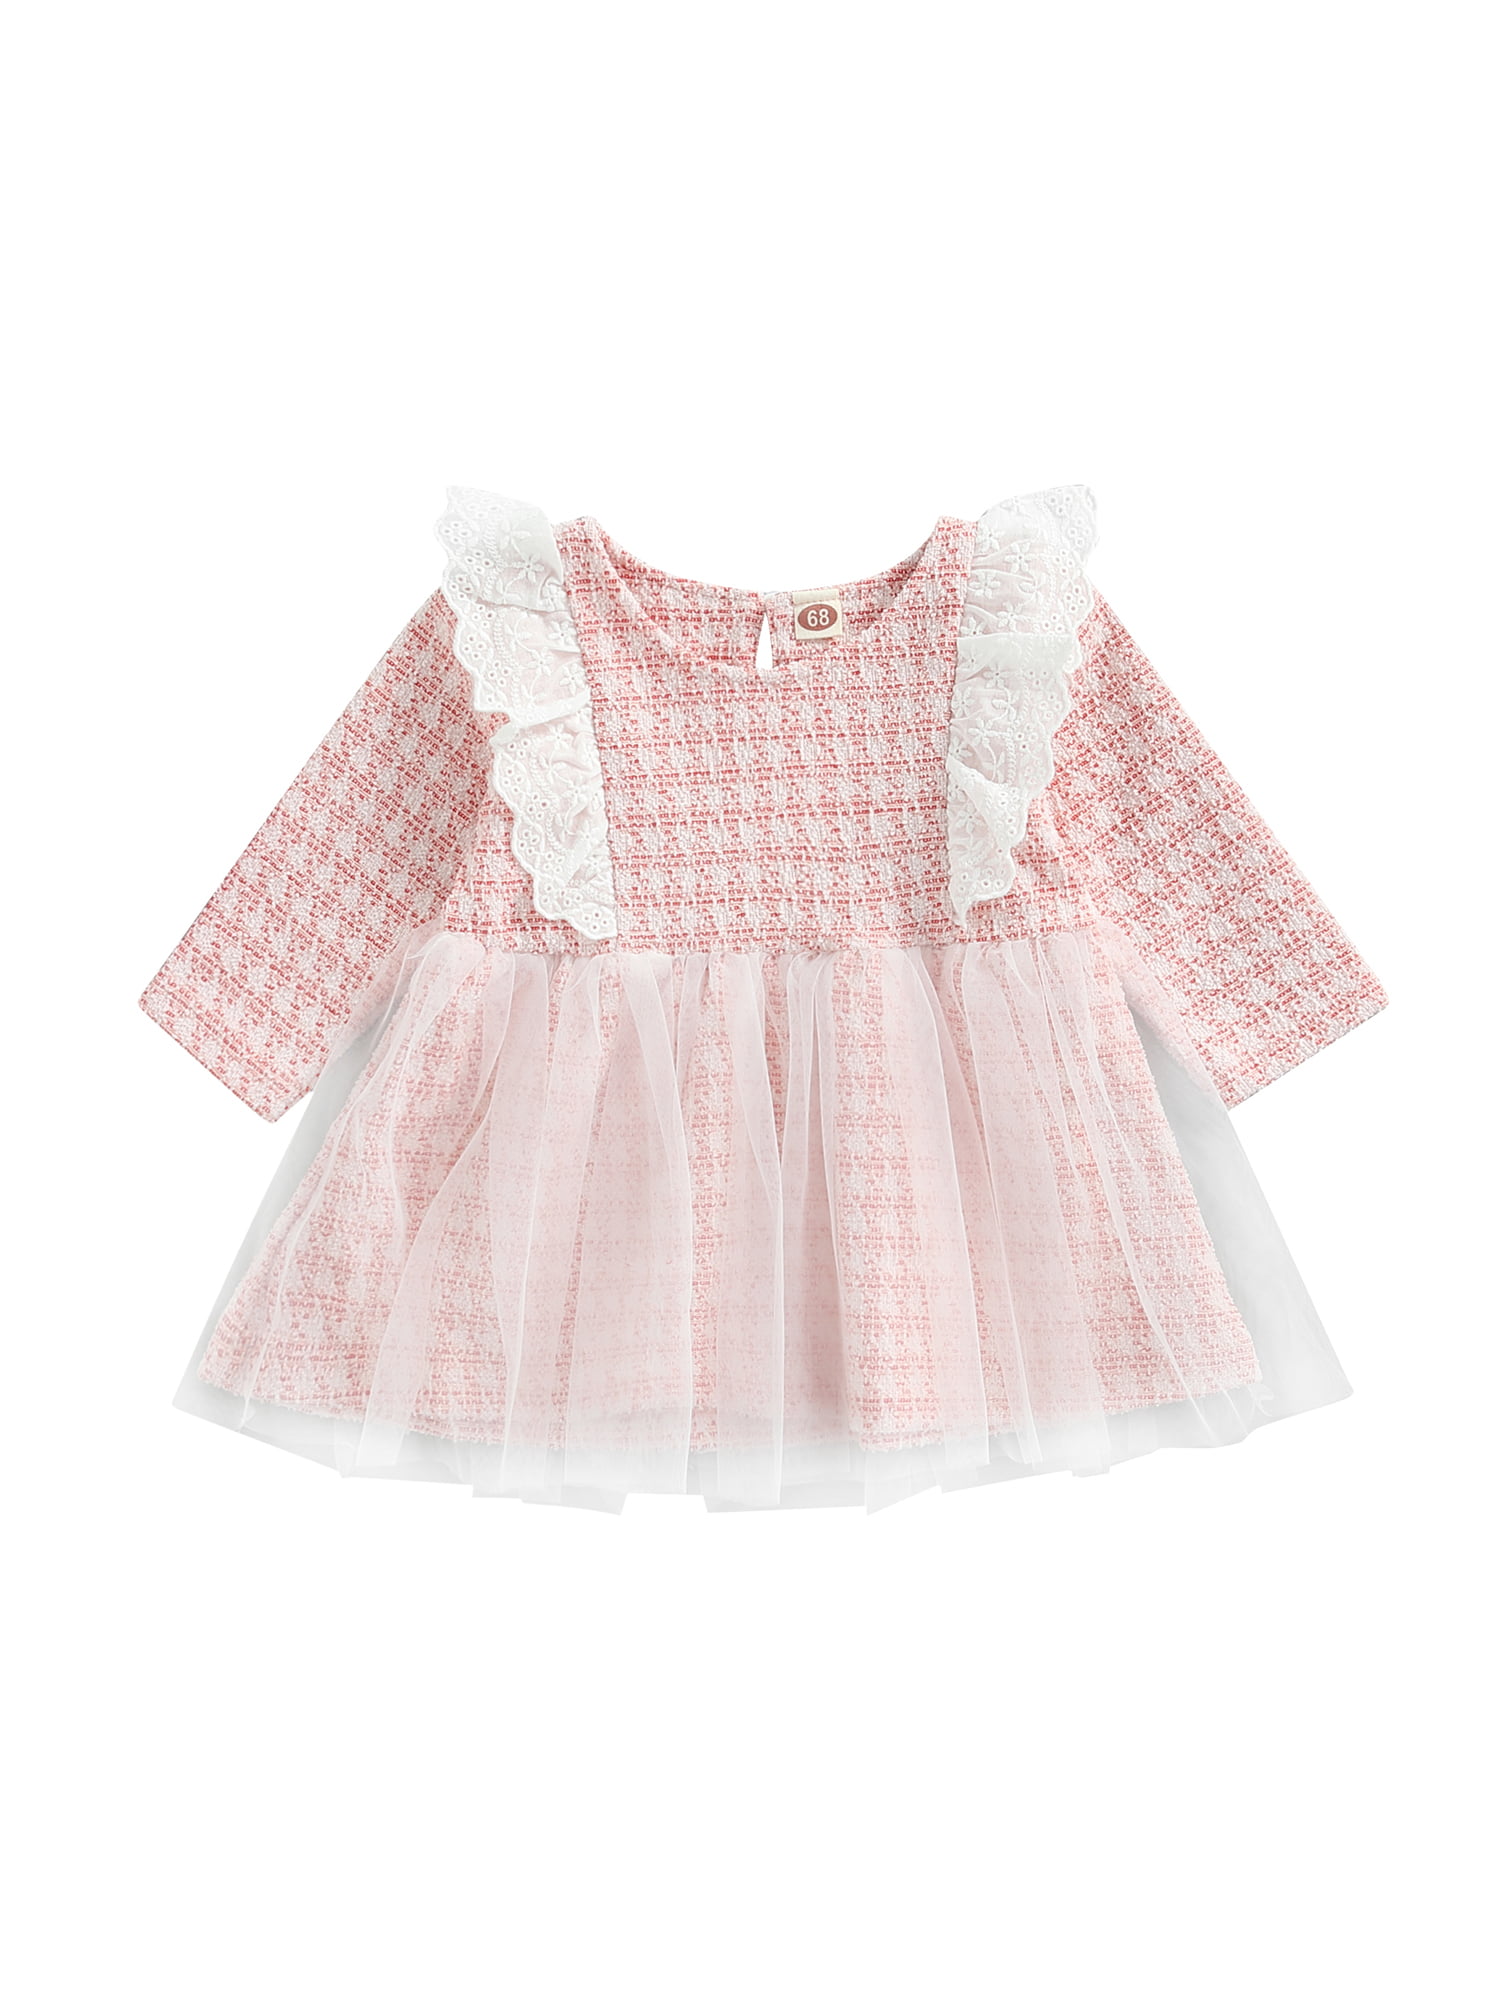 Toddler Newborn Baby Girl Skirt Cute Fashion Outfits Long Sleeve Cardigans Plaid Floral A-line Mesh Tulle Mini Dress 